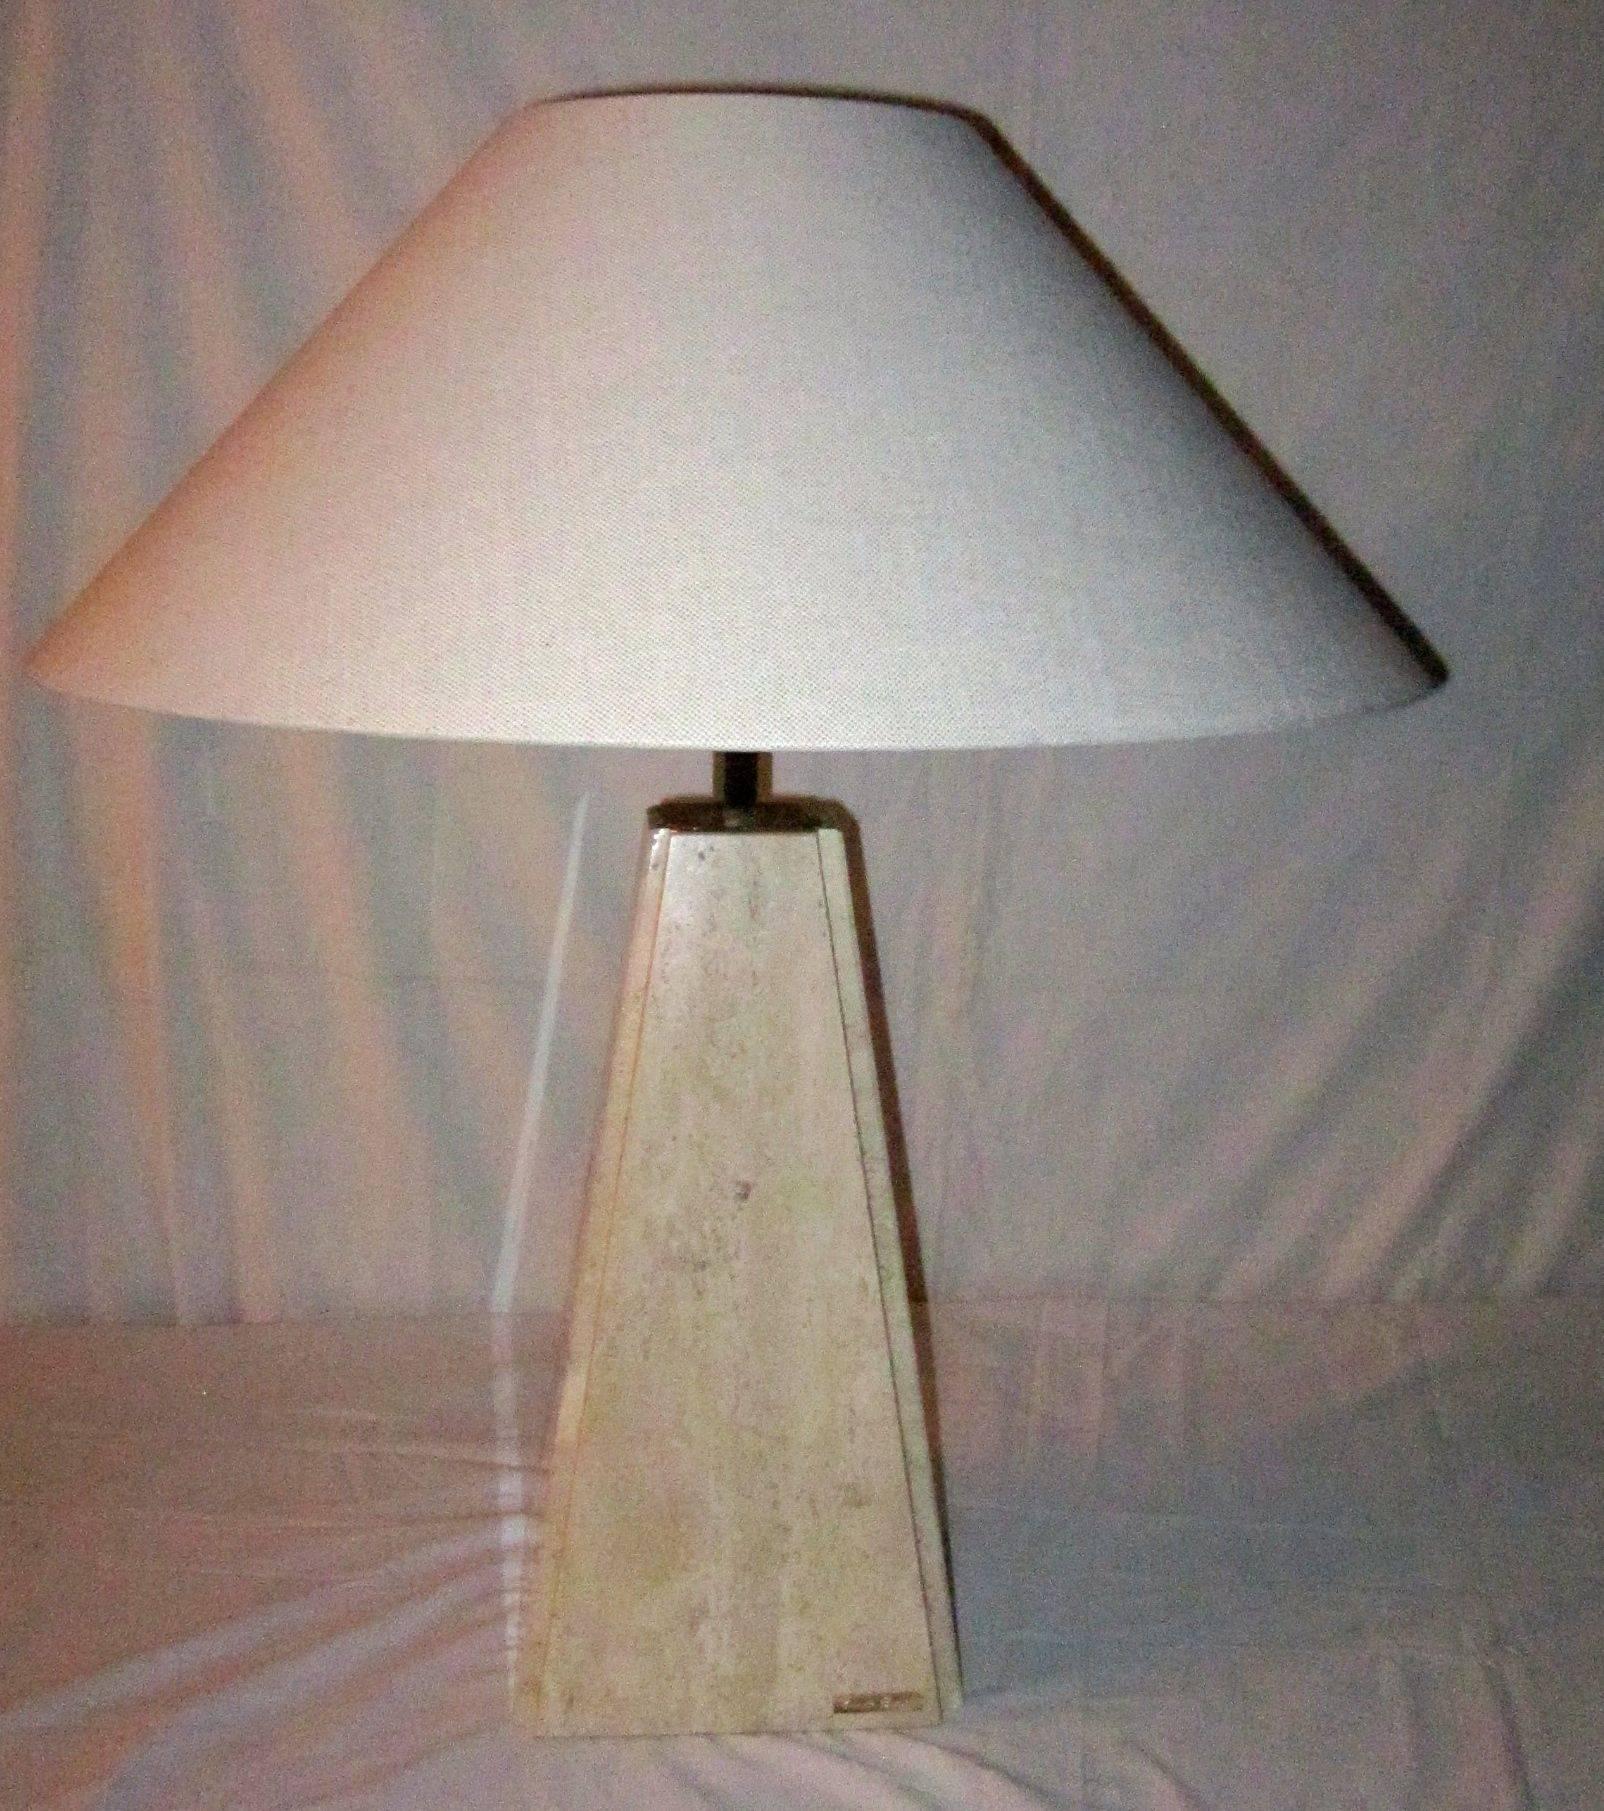 1970s pair of Belgian travertine lamps signed by Camille Breesch.
Pyramid shaped base and cream shade.
Base measures 8